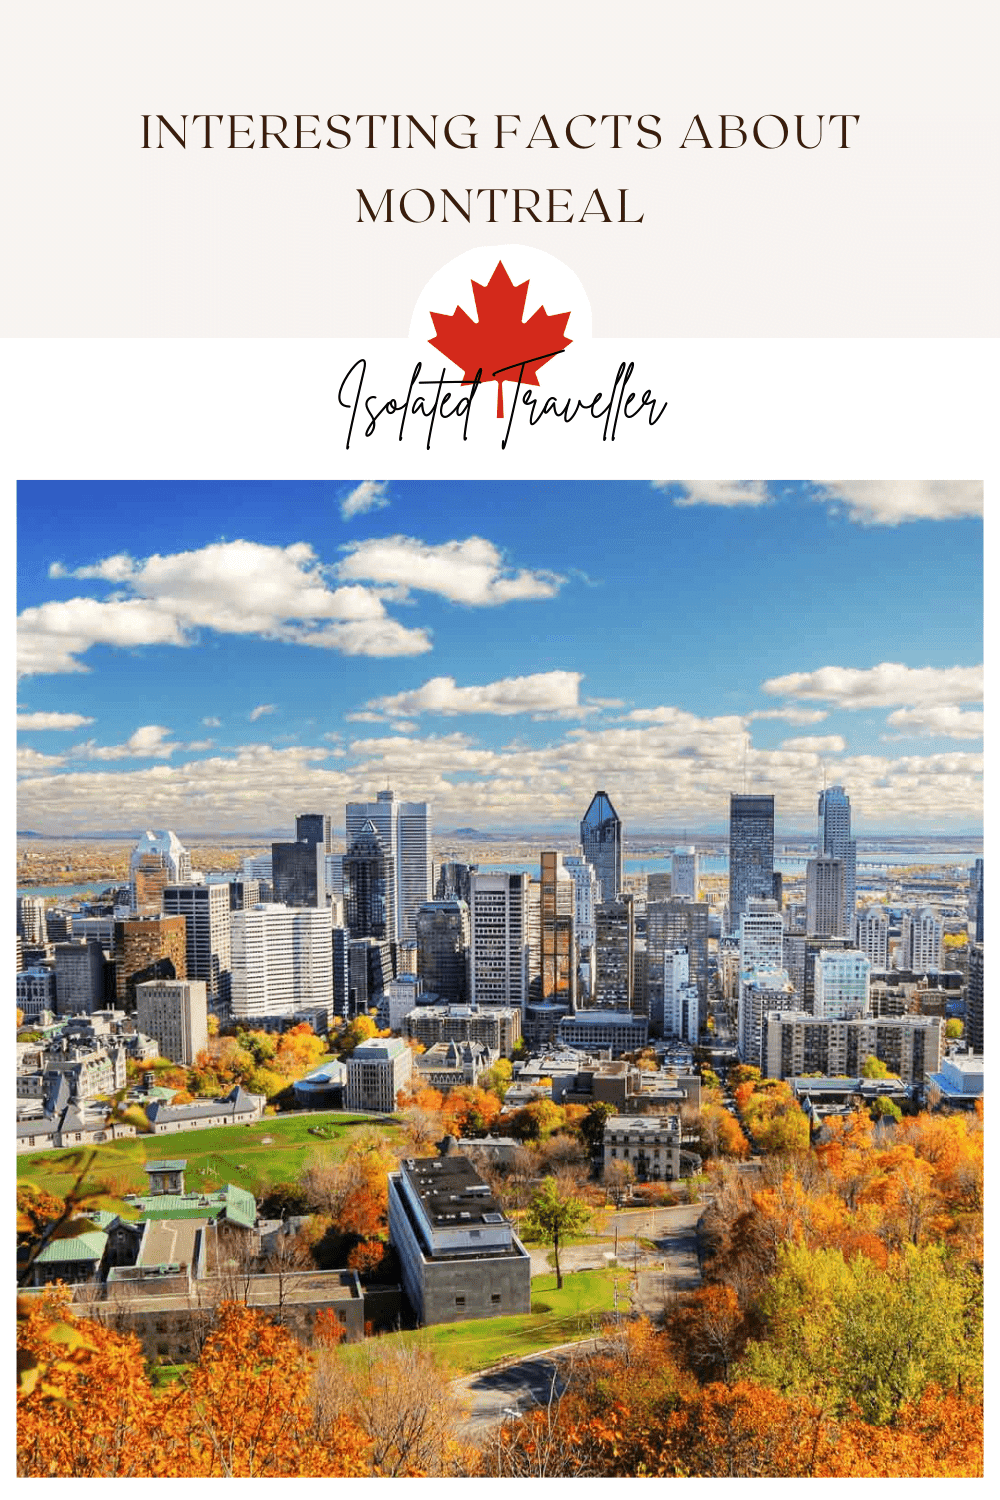 Facts About Montreal